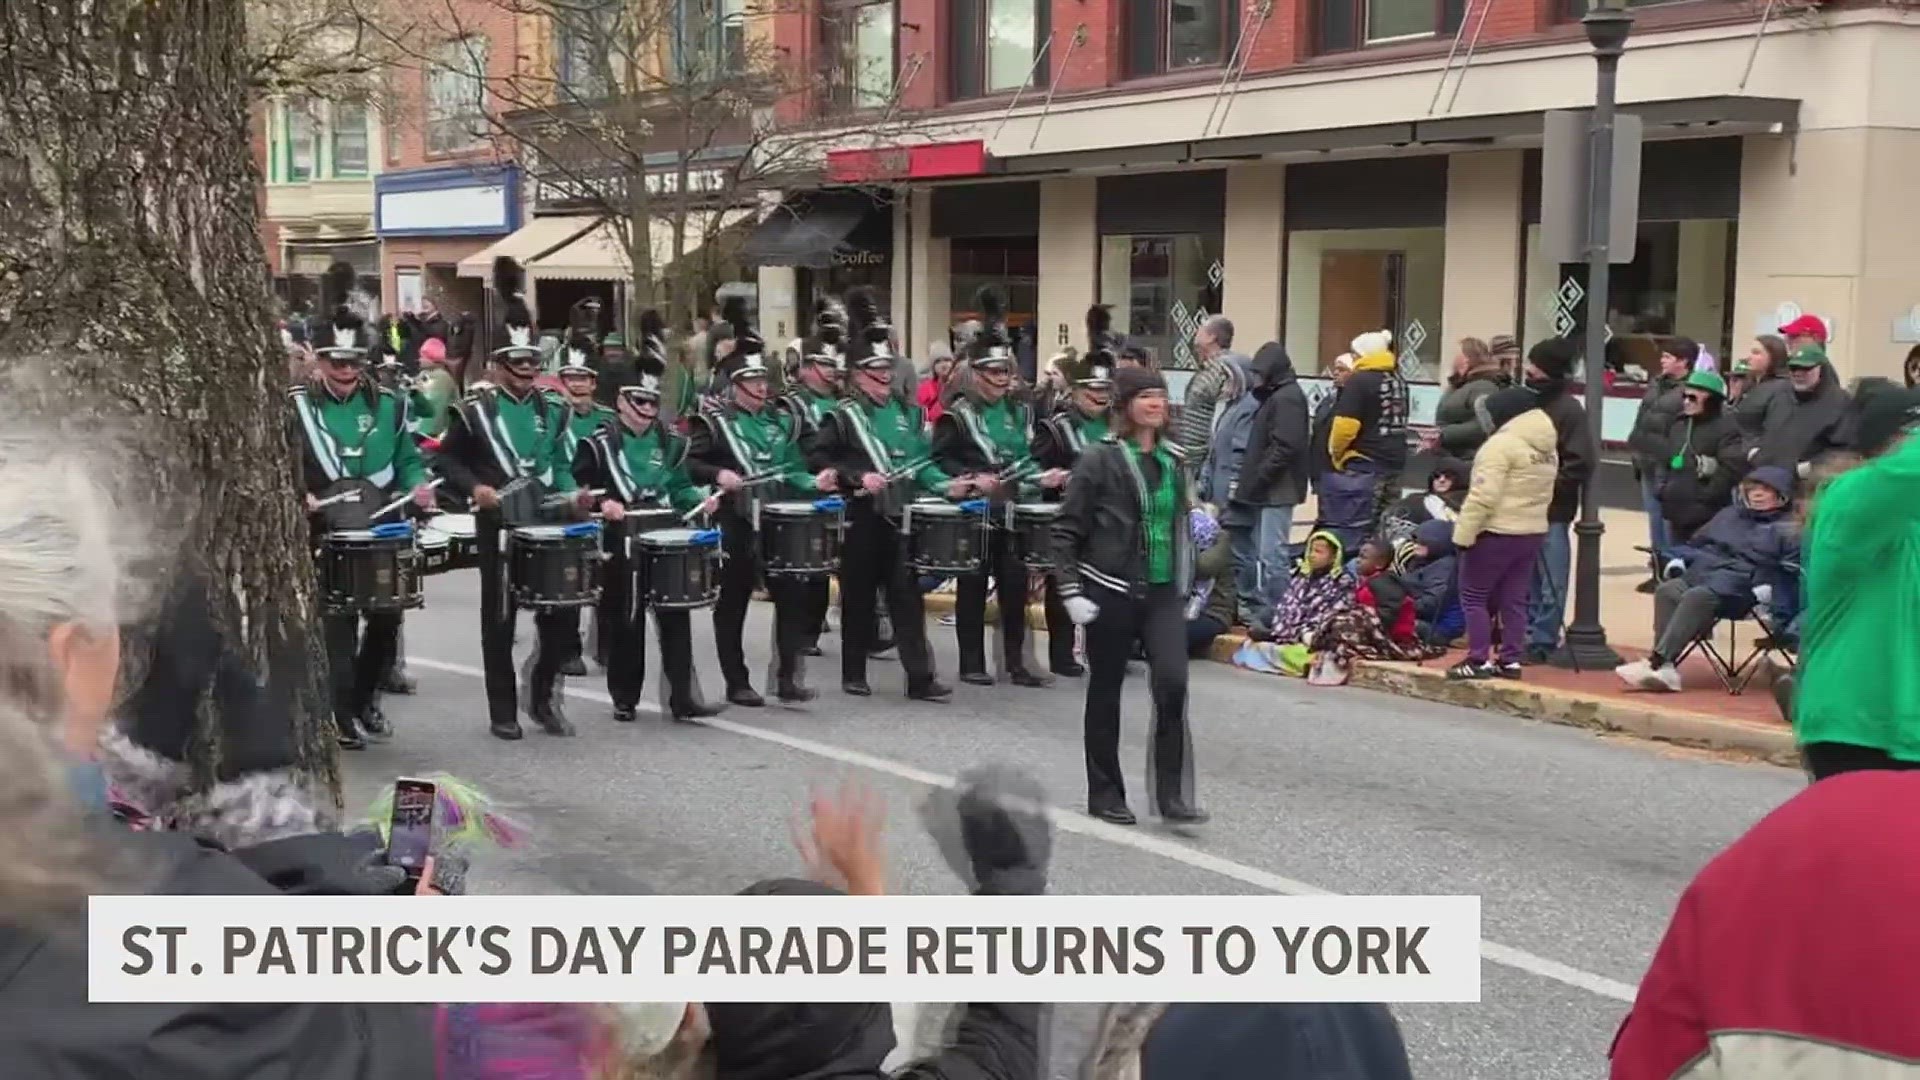 Organizers and parade goers alike celebrated the parade’s triumphant return, after being away for three years due to the pandemic.